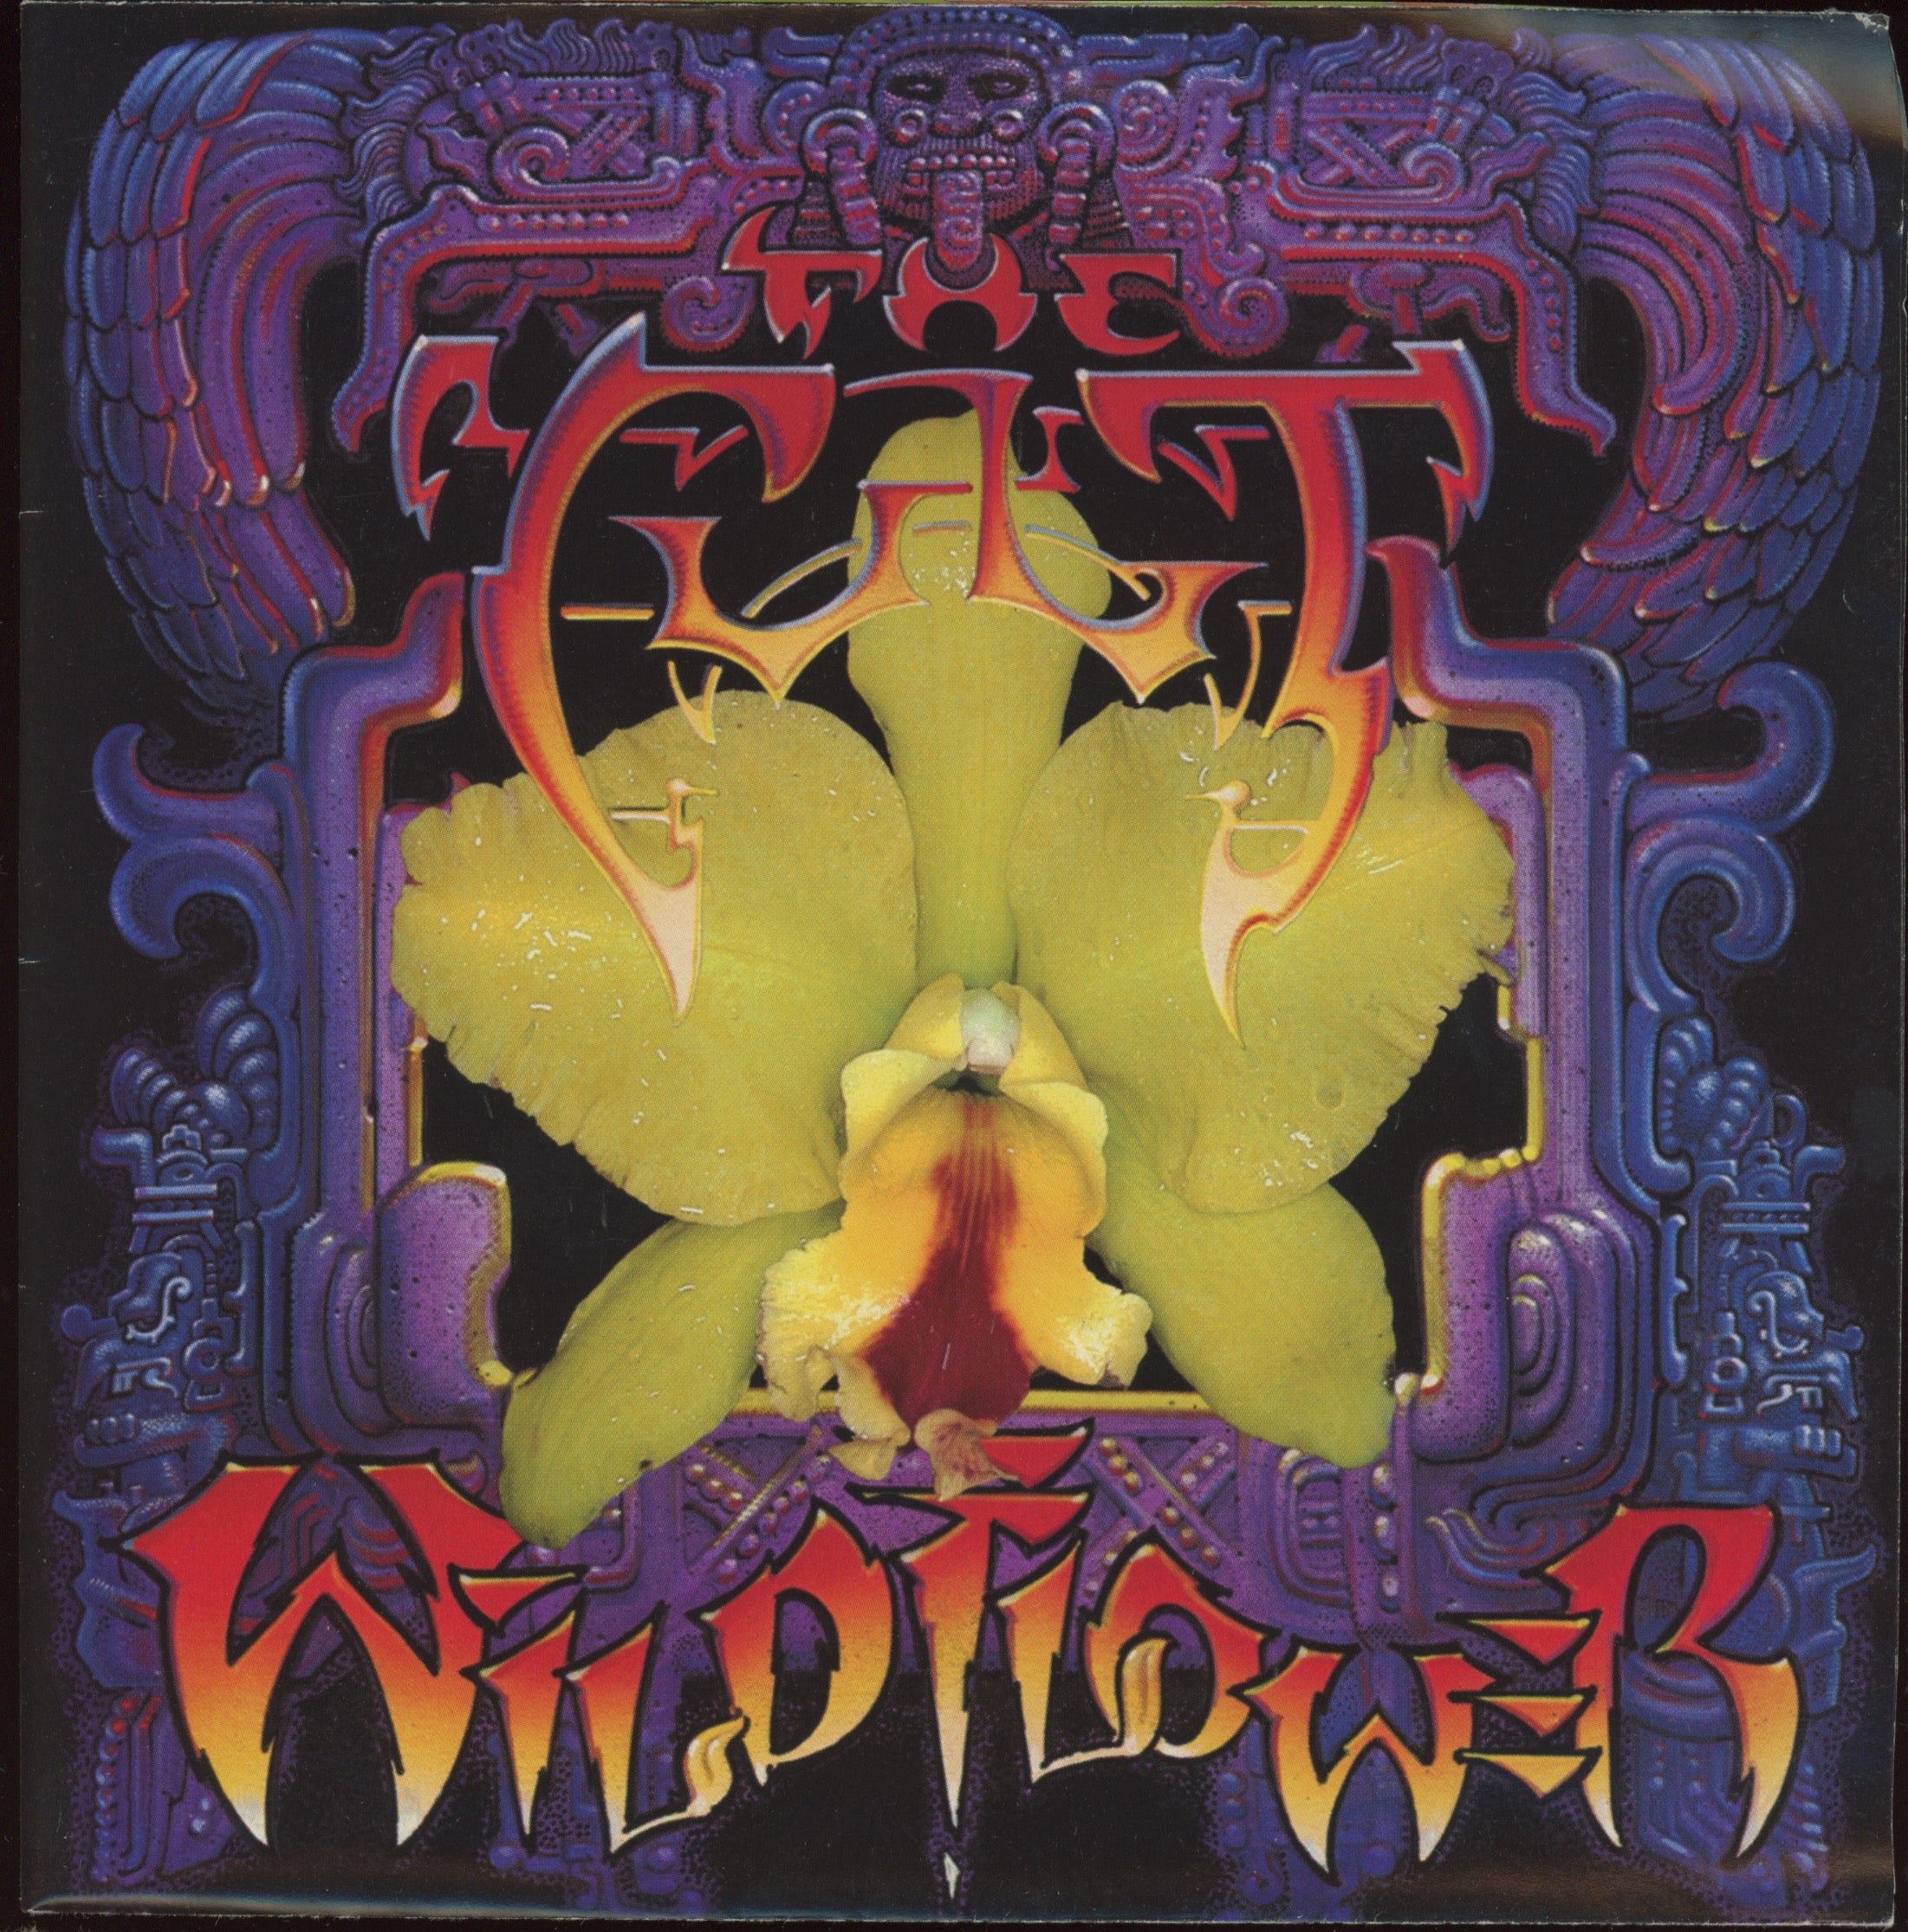 The Cult - Wild Flower on Sire With Poster Sleeve